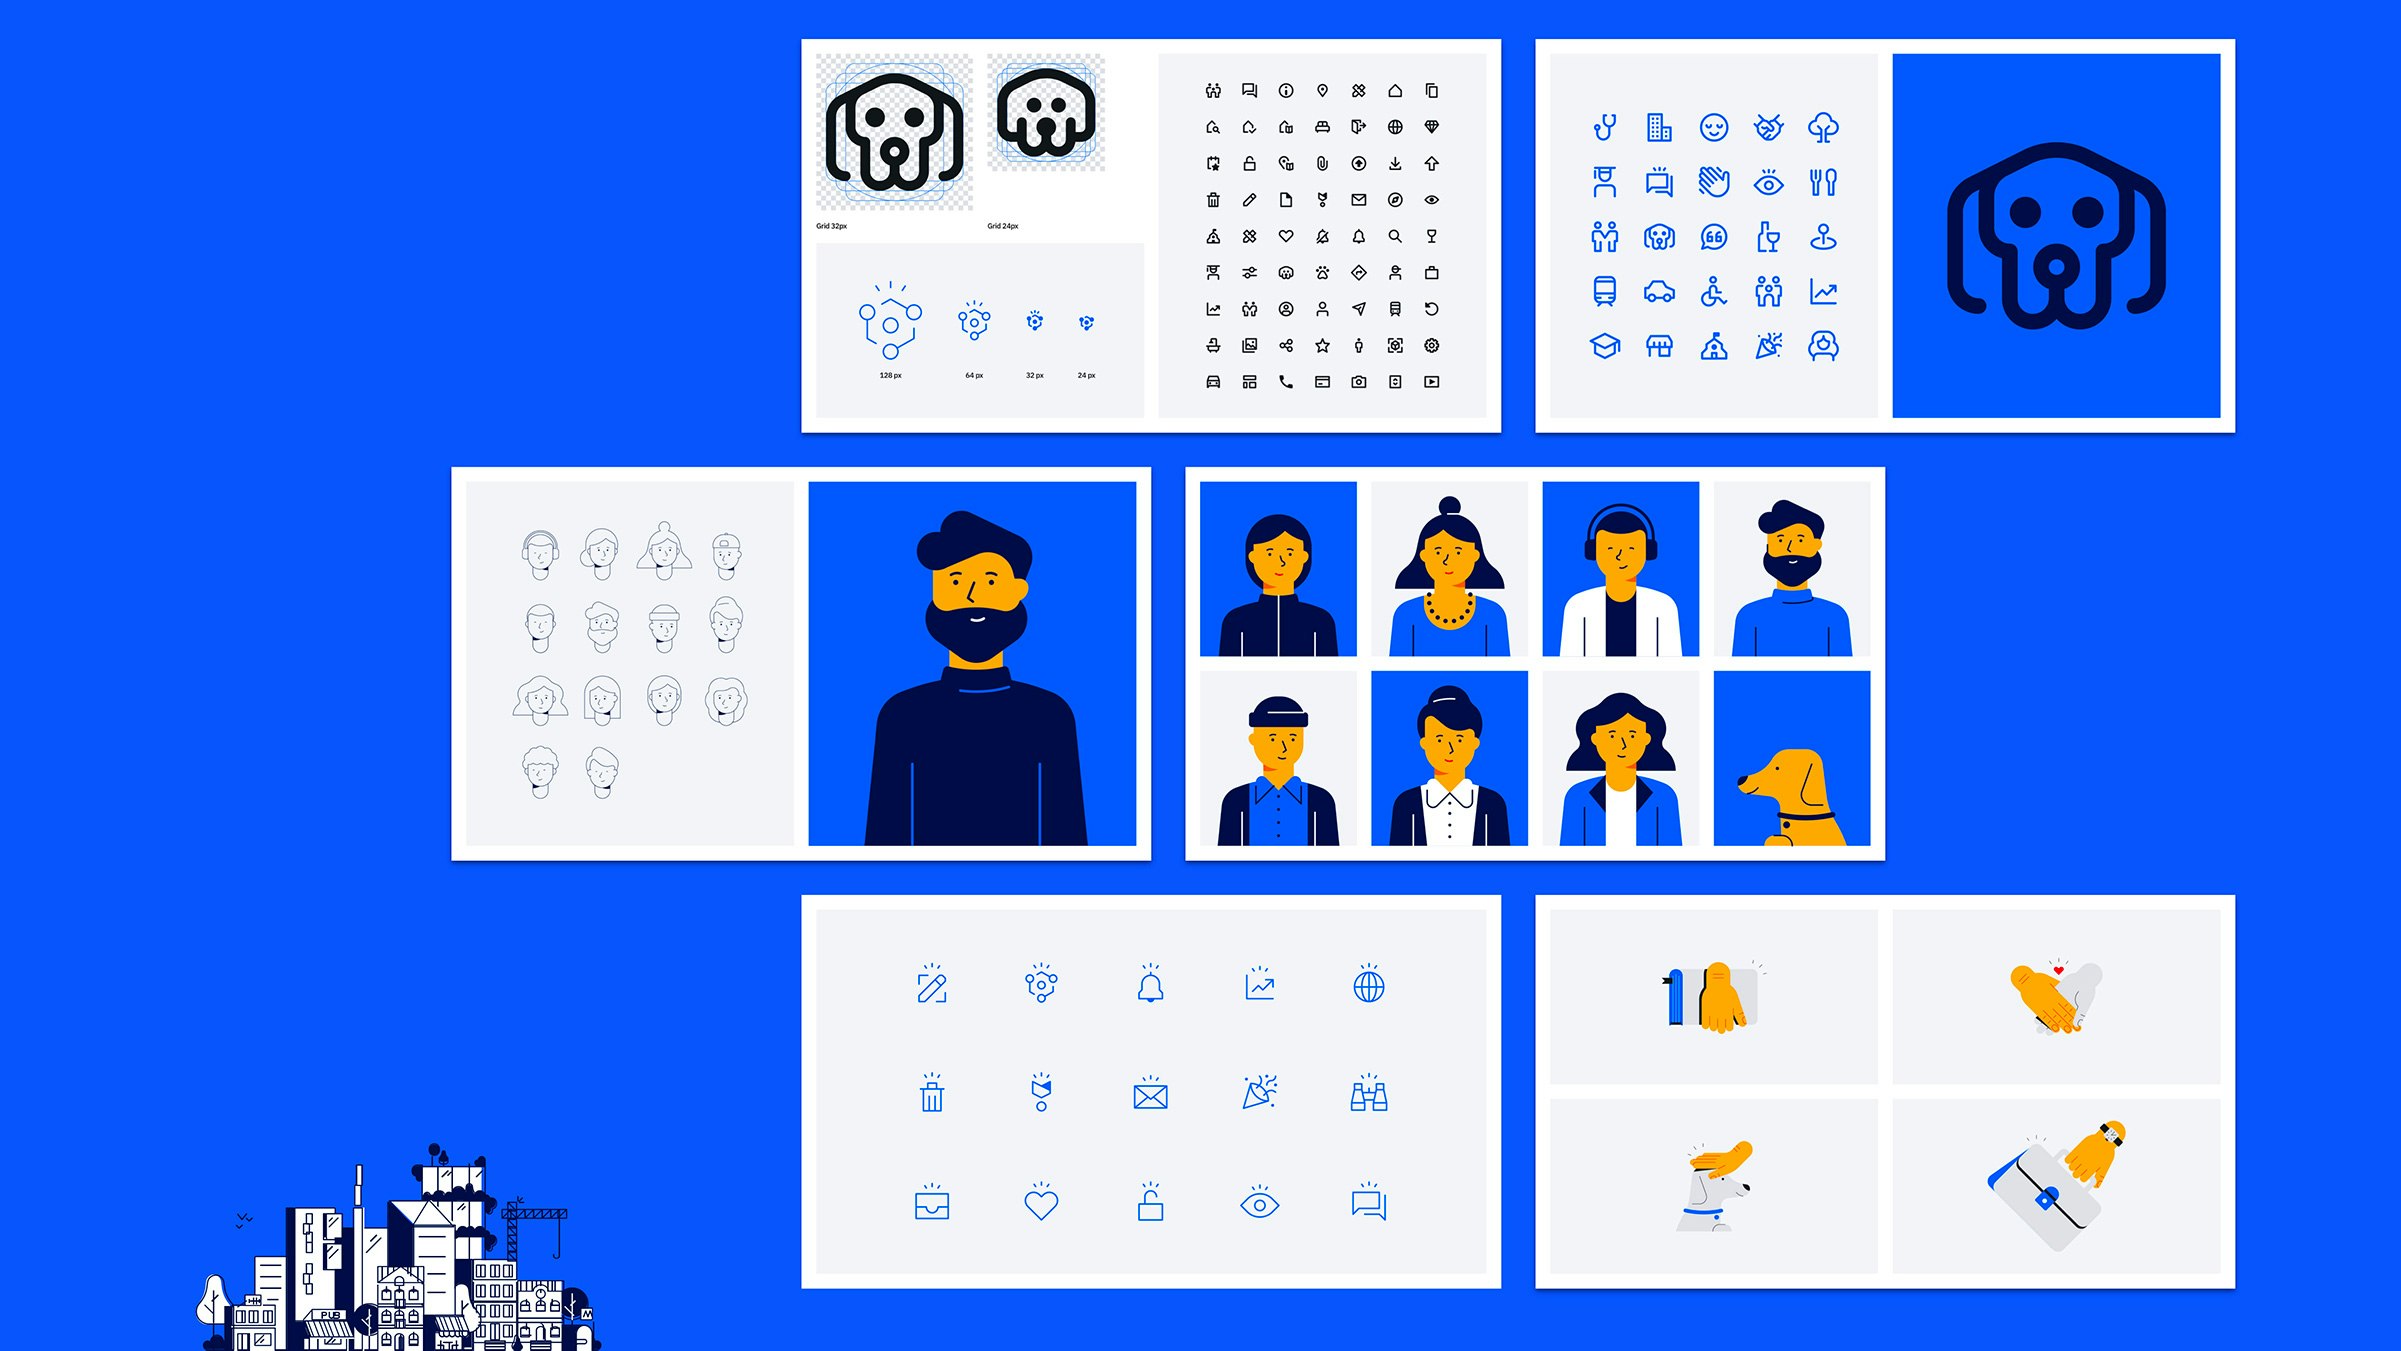 Set of specially designed illustrations and icons to make the visual identity unique and consistent